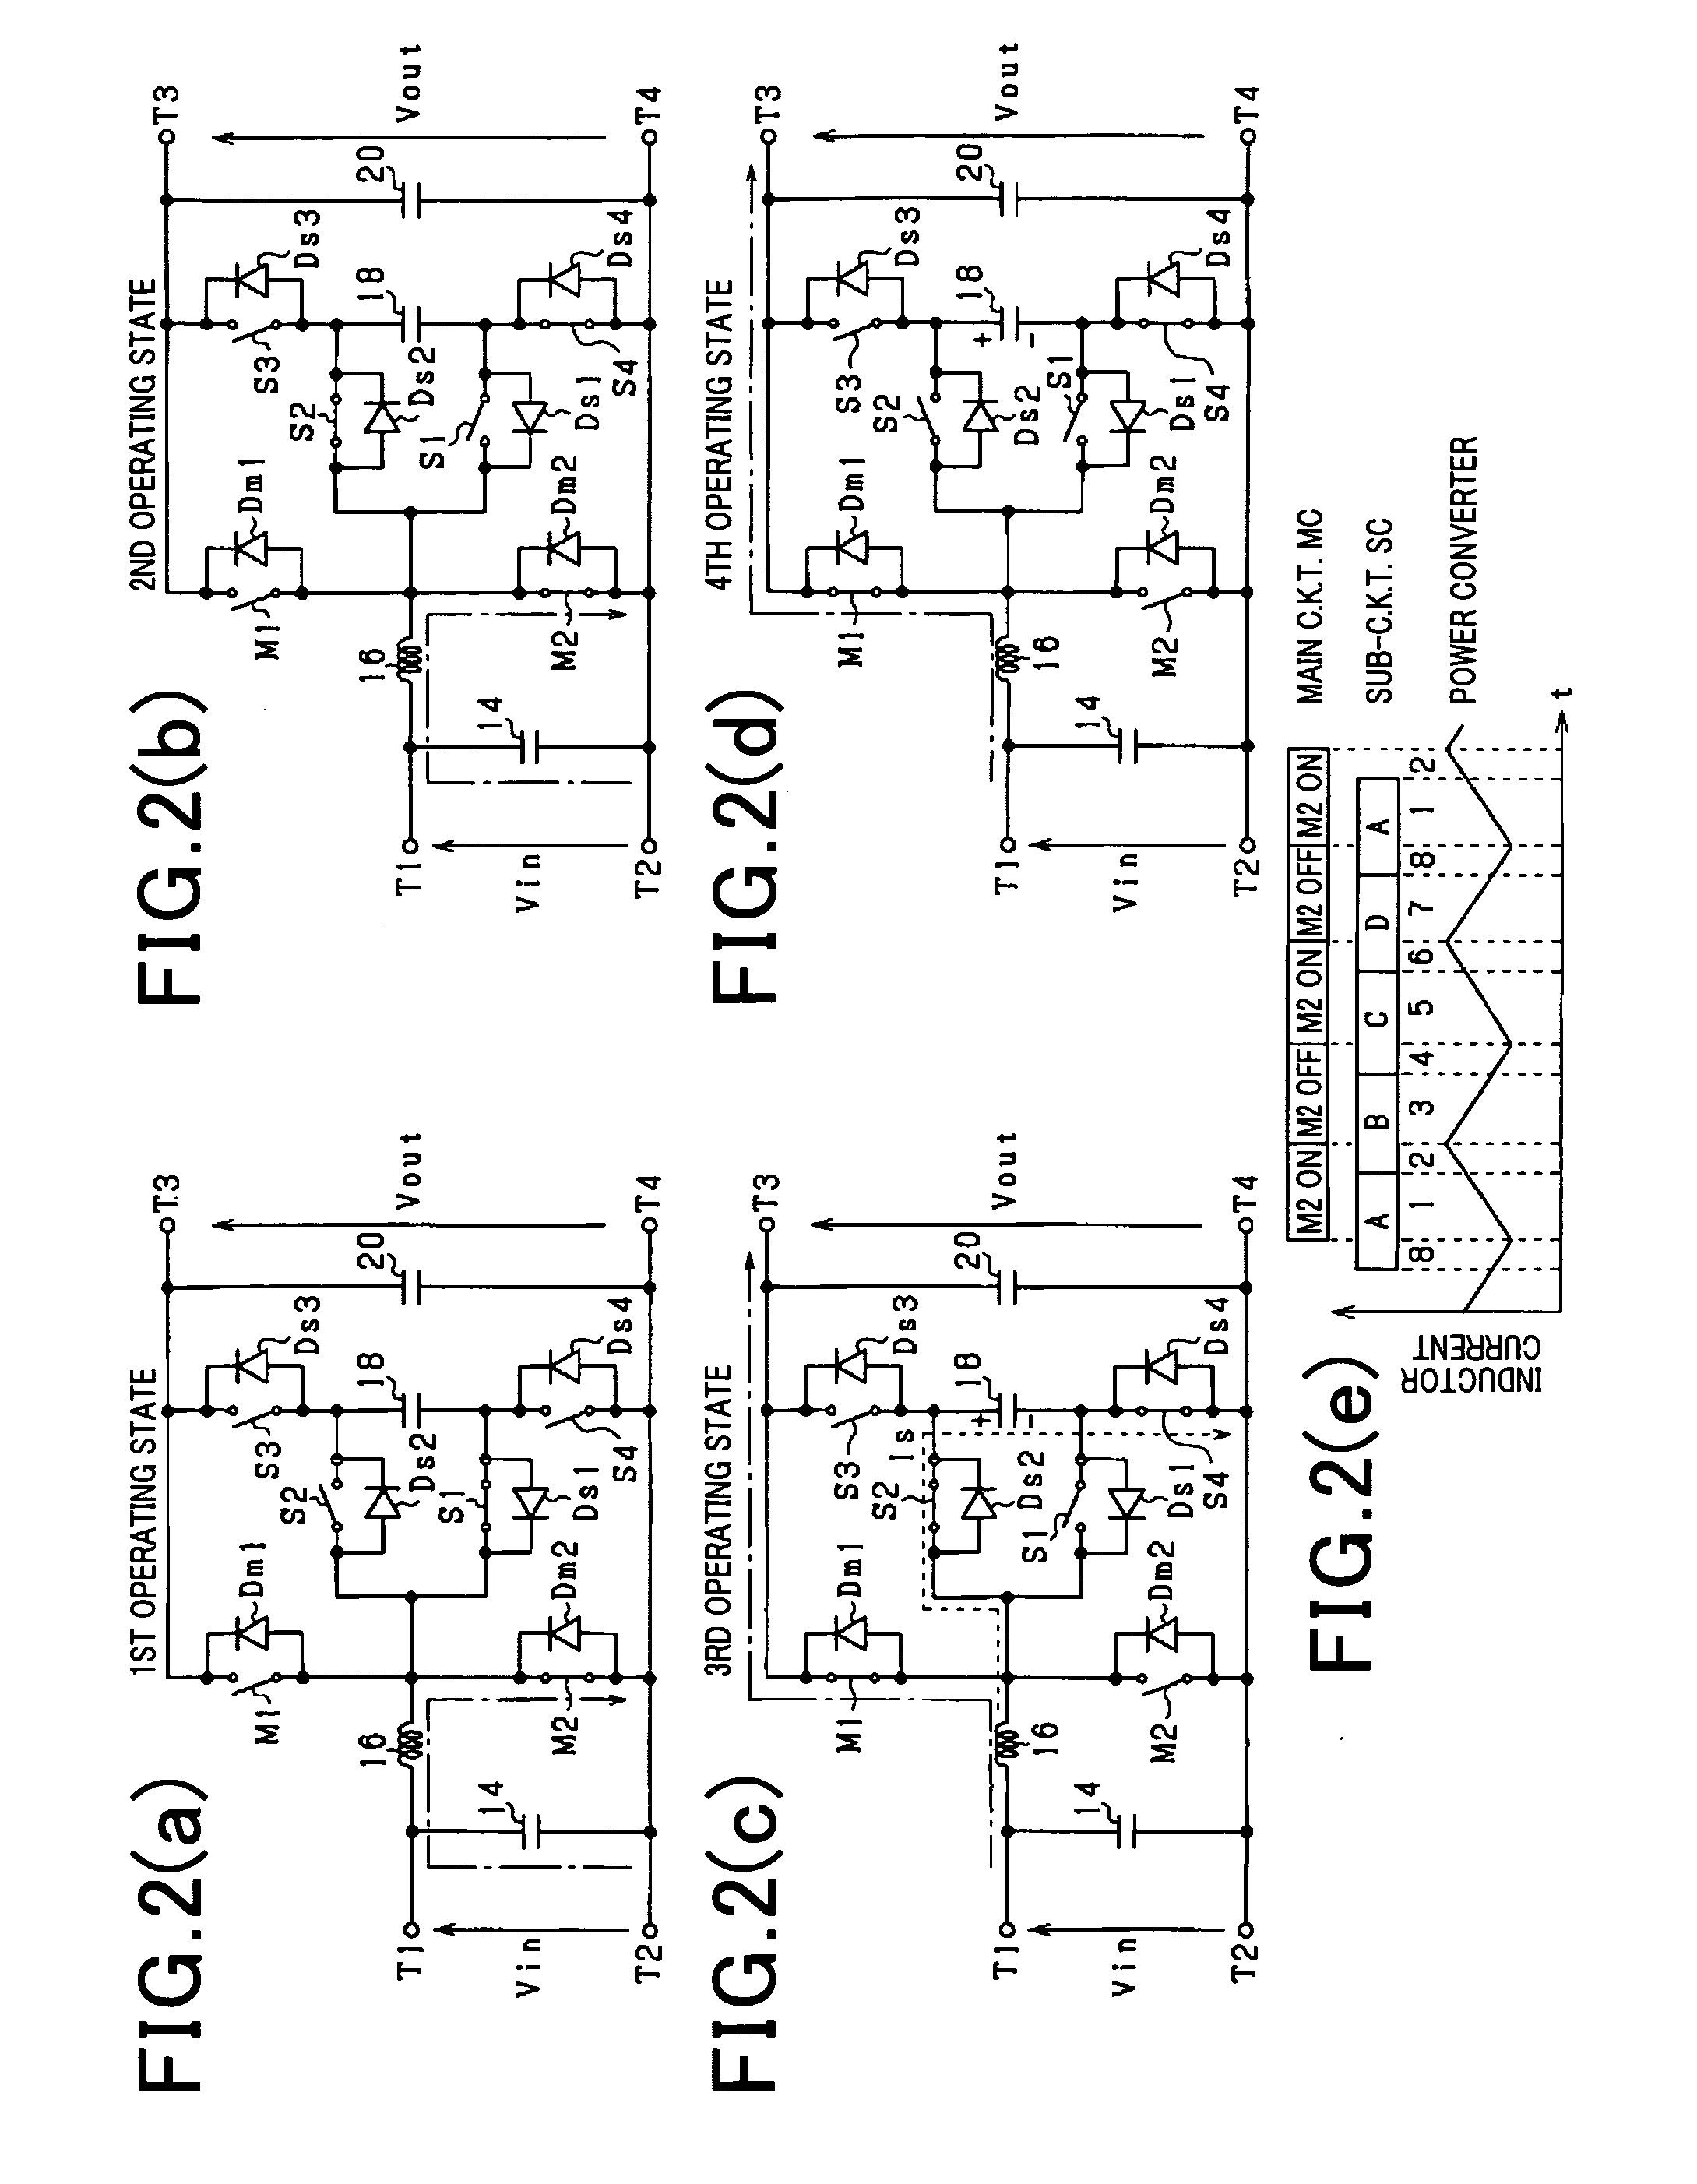 Compact power converter with high efficiency in operation